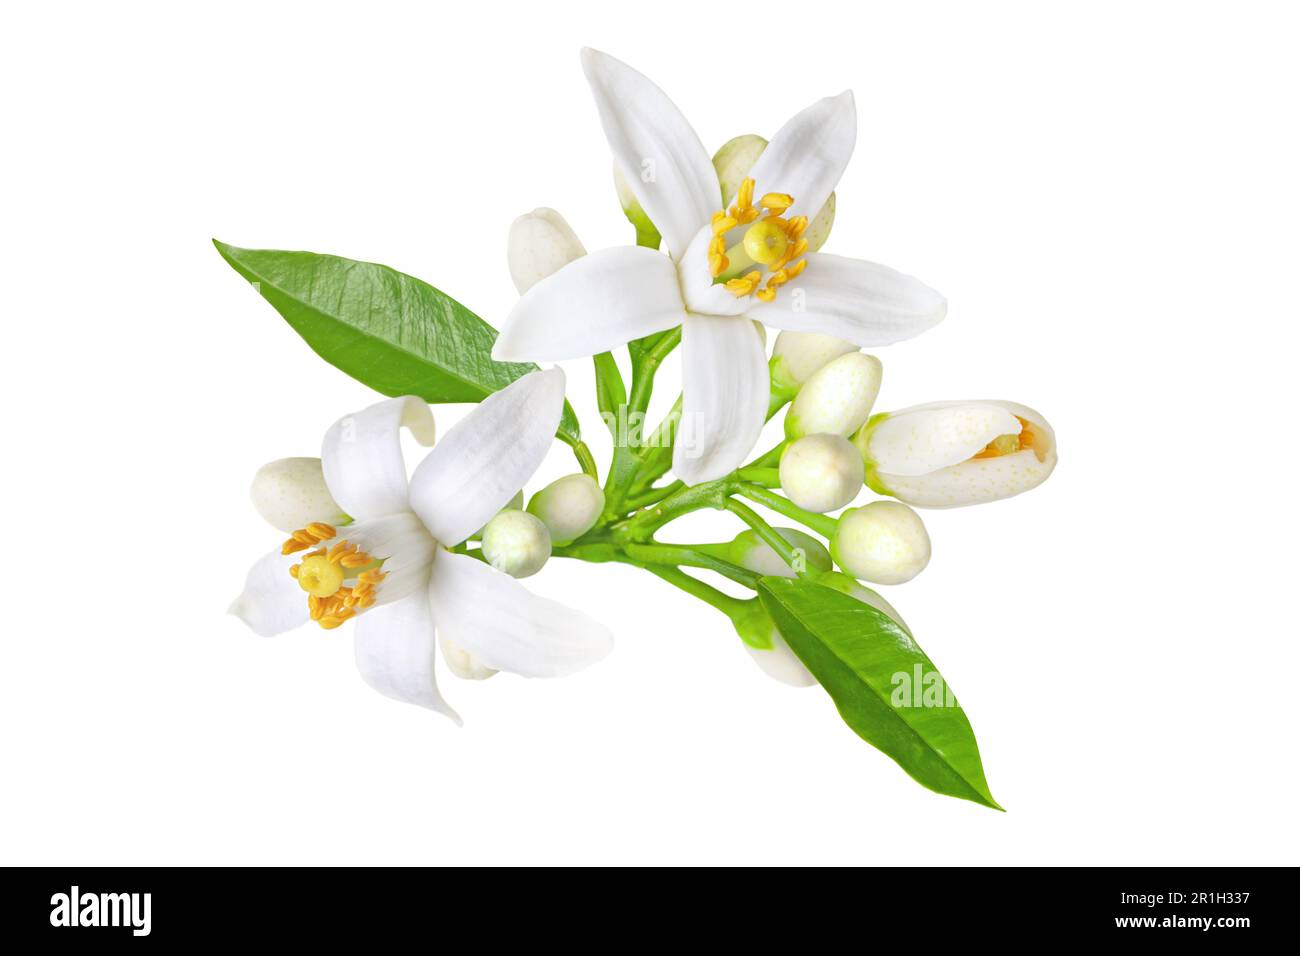 Neroli blossom. Citrus bloom. Orange tree white flowers, buds and leaves bunch isolated on white. Stock Photo